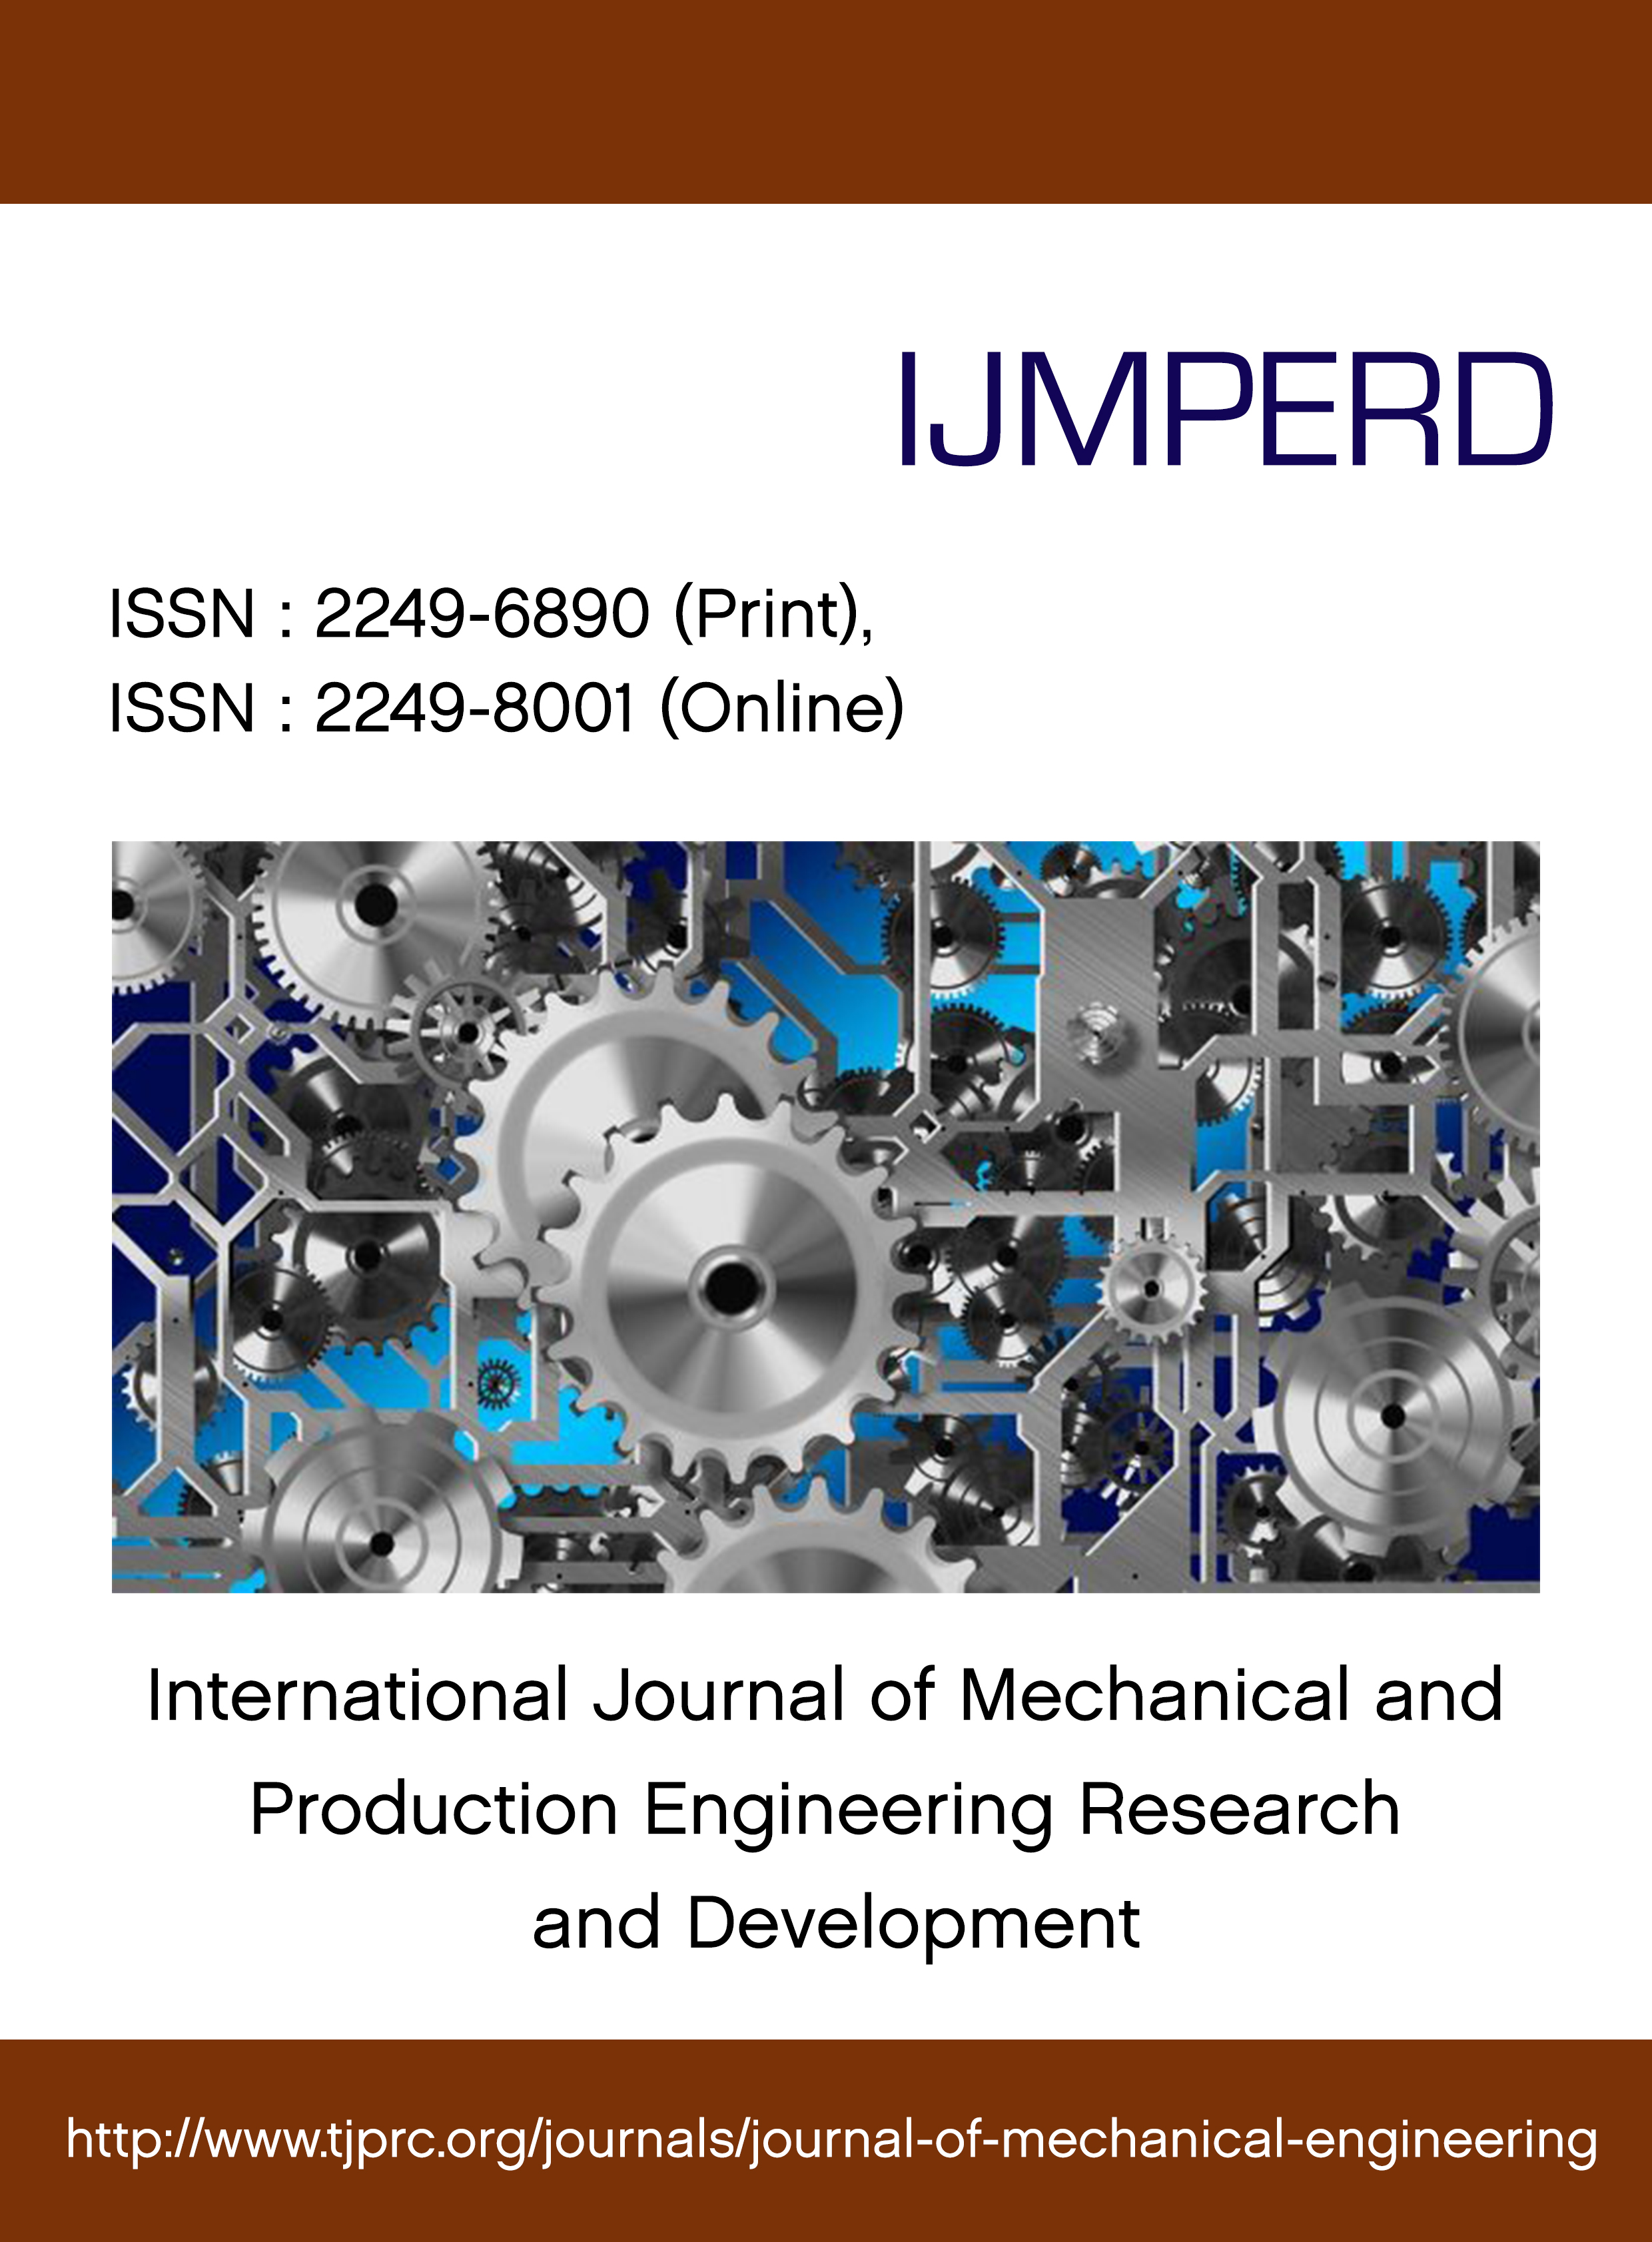 International Journal of Mechanical and Production Engineering Research and Development